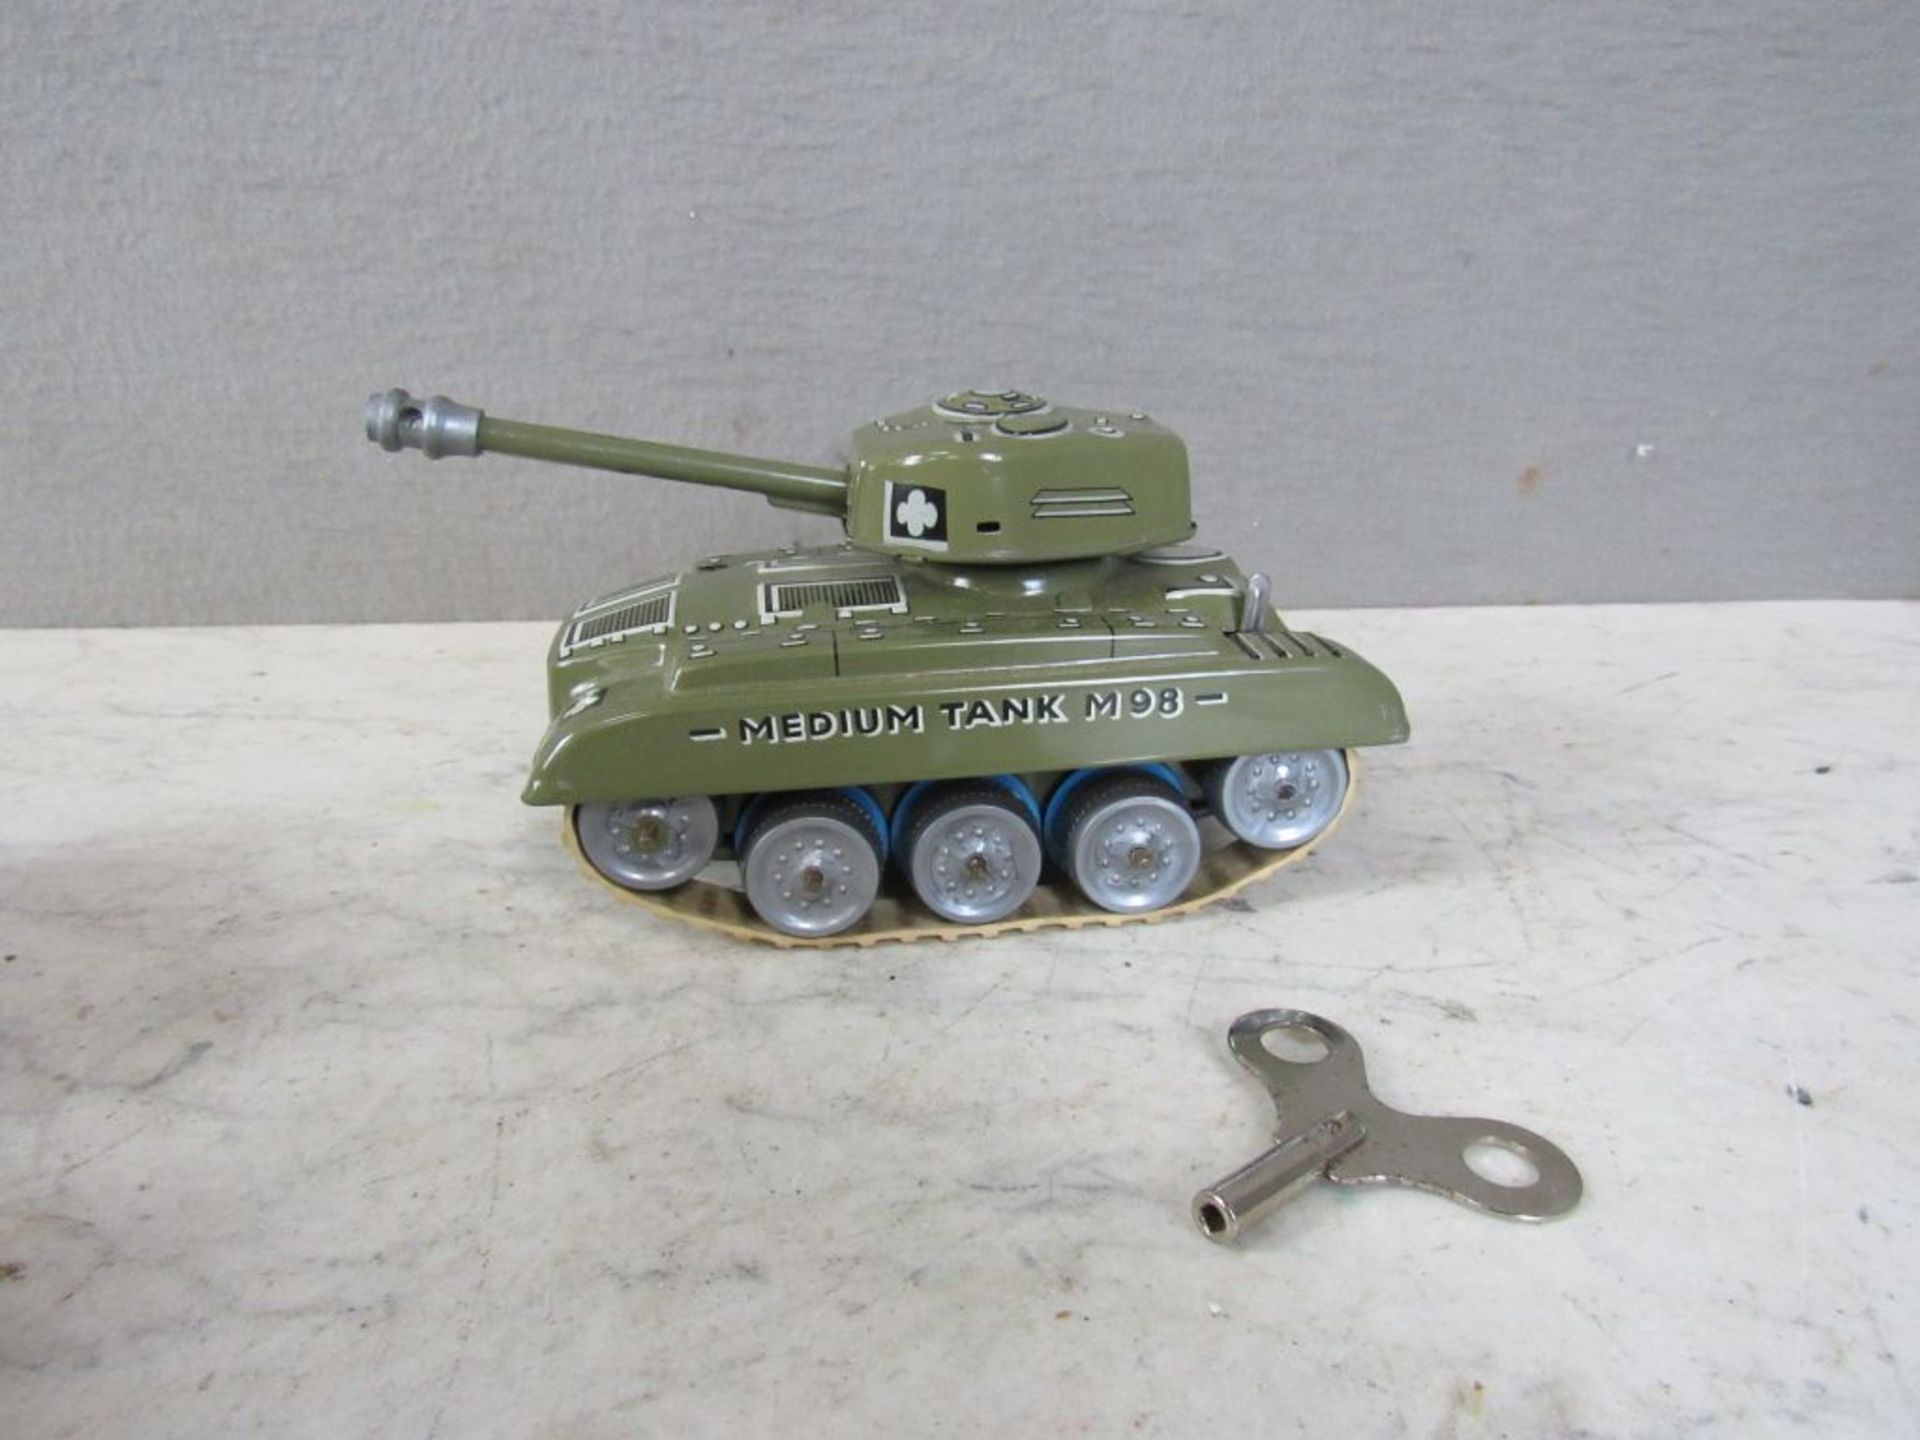 Blechspielzeug Panzer Gama Modell 984 - Image 3 of 10